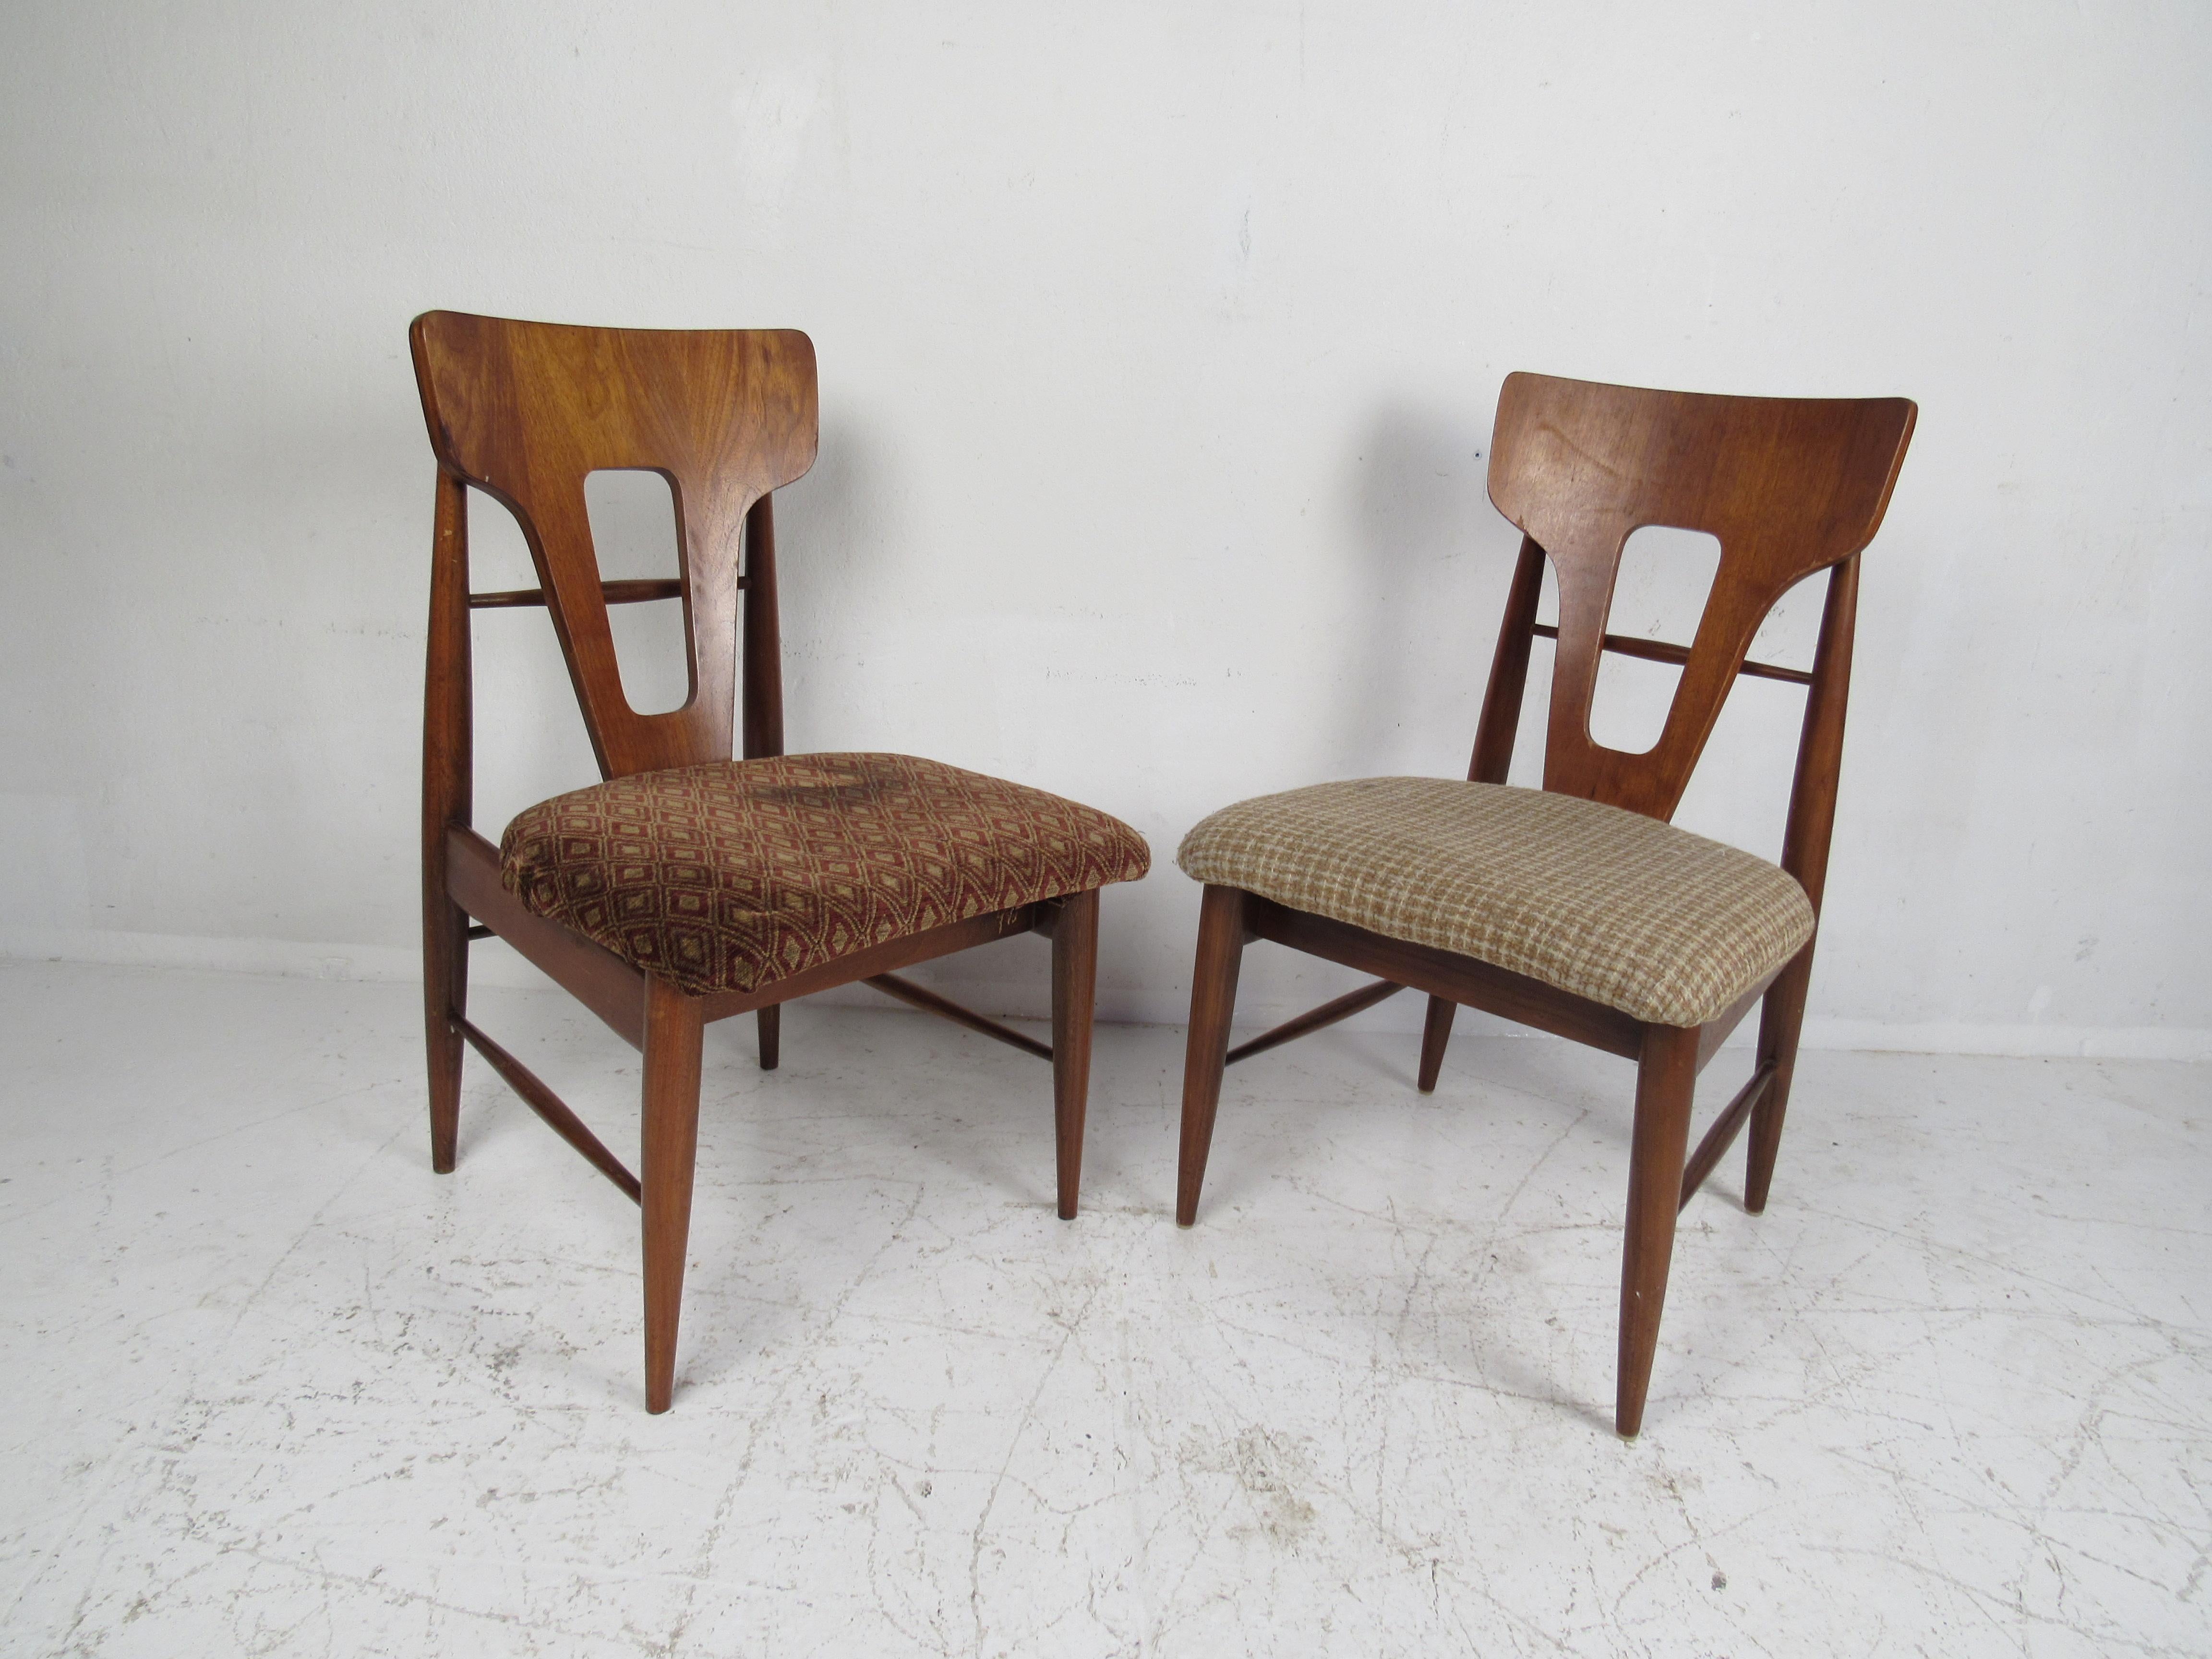 A unique set of ten vintage modern dining chairs designed in the style of, 